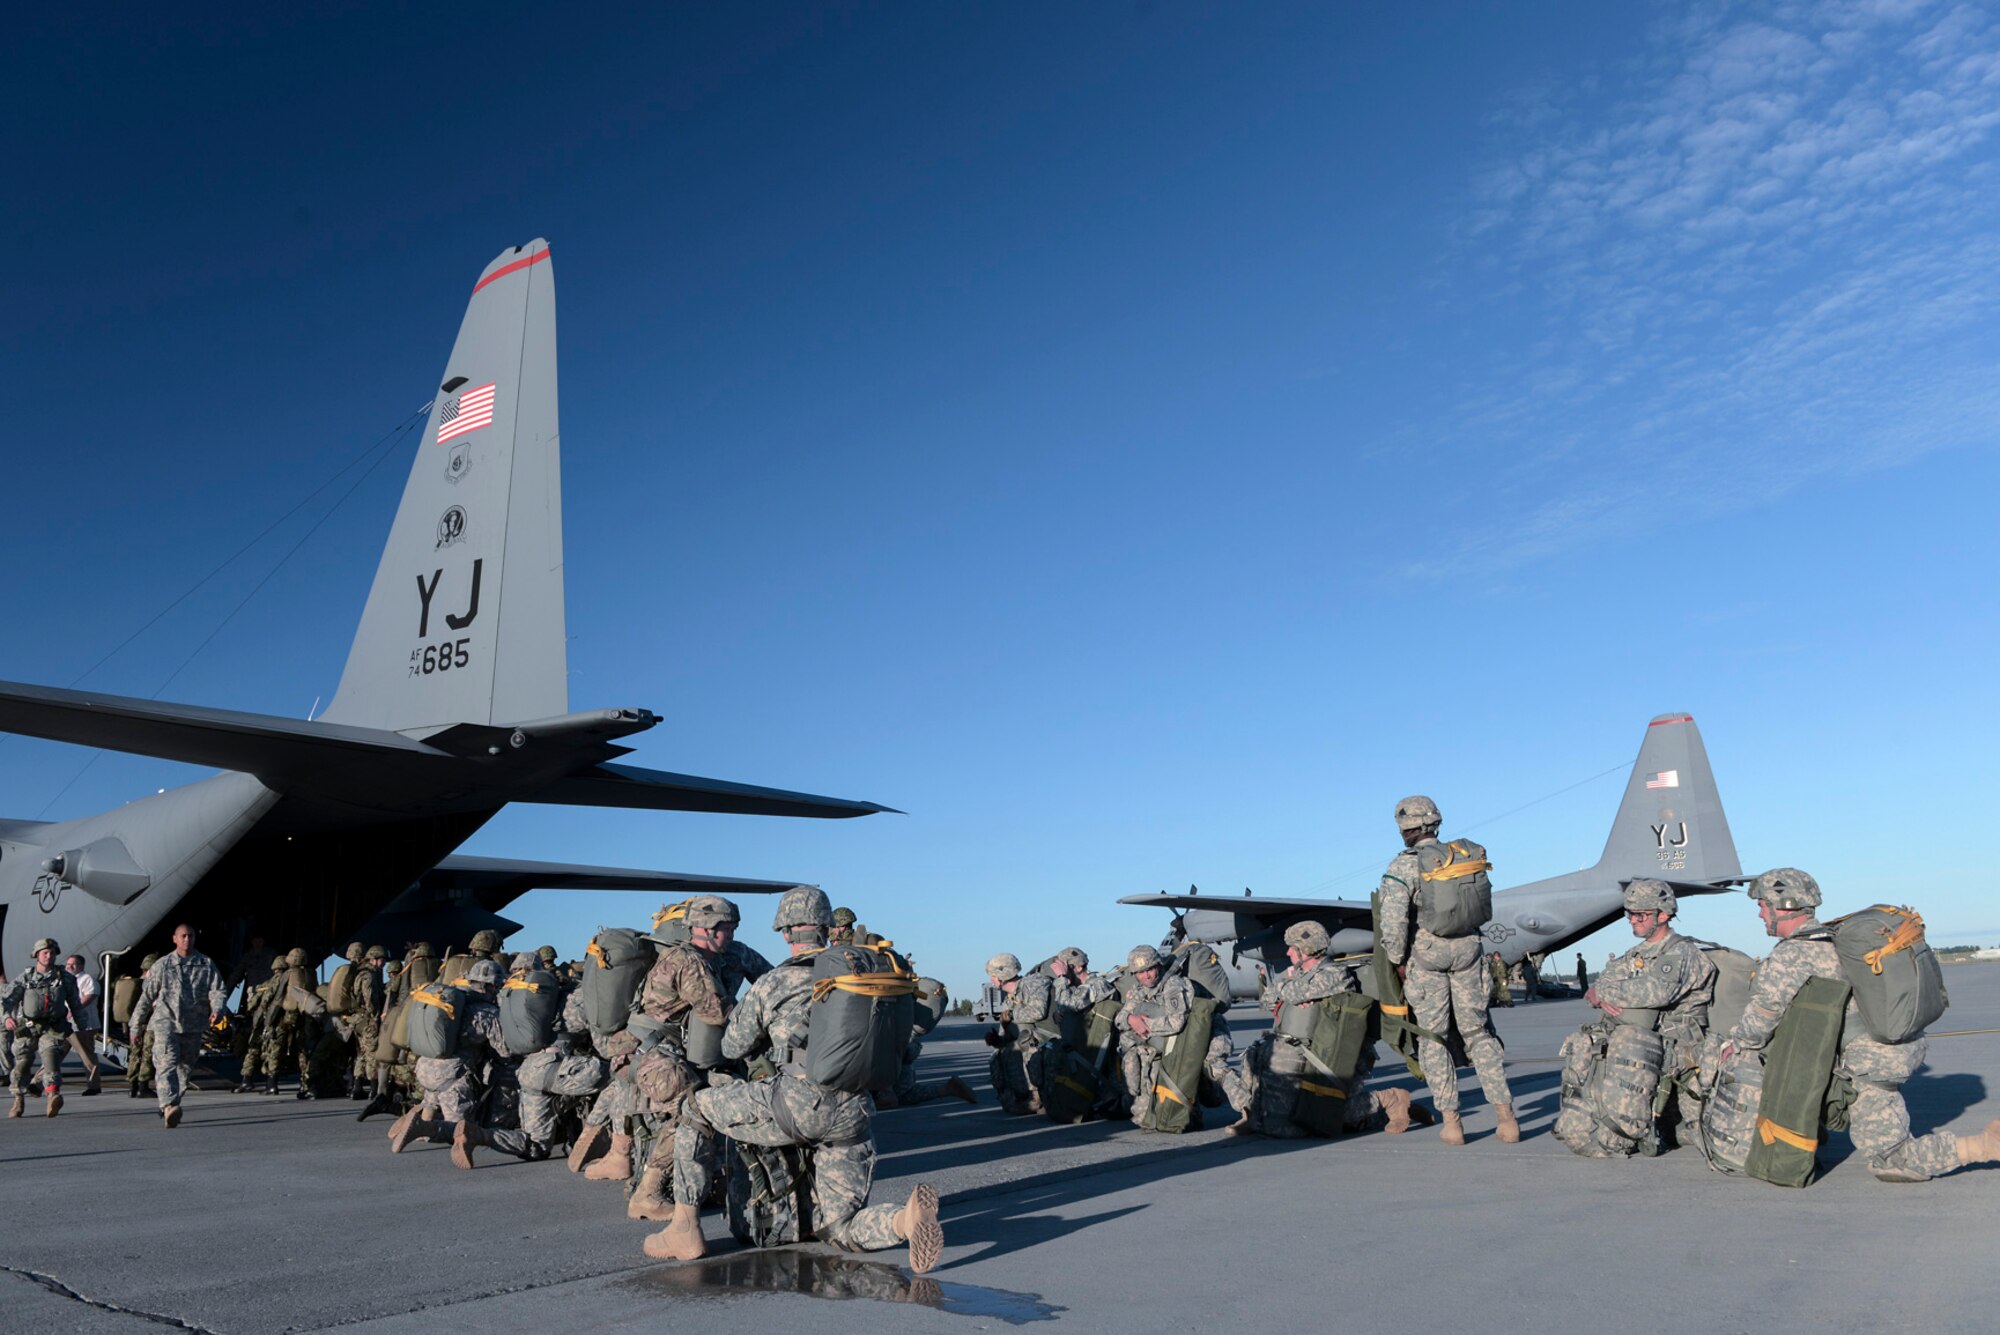 U.S. Soldiers with the 1st Battalion (Airborne), 501st Infantry Regiment, and members of the Japan Ground Self-Defense Force wait to board a C-130 Hercules from Yokota Air Base, Japan, during Red Flag-Alaska at Joint Base Elmendorf-Richardson, Alaska, Aug. 12, 2015. More than 60 U.S. Army Soldiers and more than 20 JGSDF members jumped from multiple C-130 Hercules during the training. More than 20 allied countries have participated in Red Flag-Alaska since its conception, improving integration, interoperability and cross-cultural competence. (U.S. Air Force photo by Staff Sgt. Cody H. Ramirez/Released)